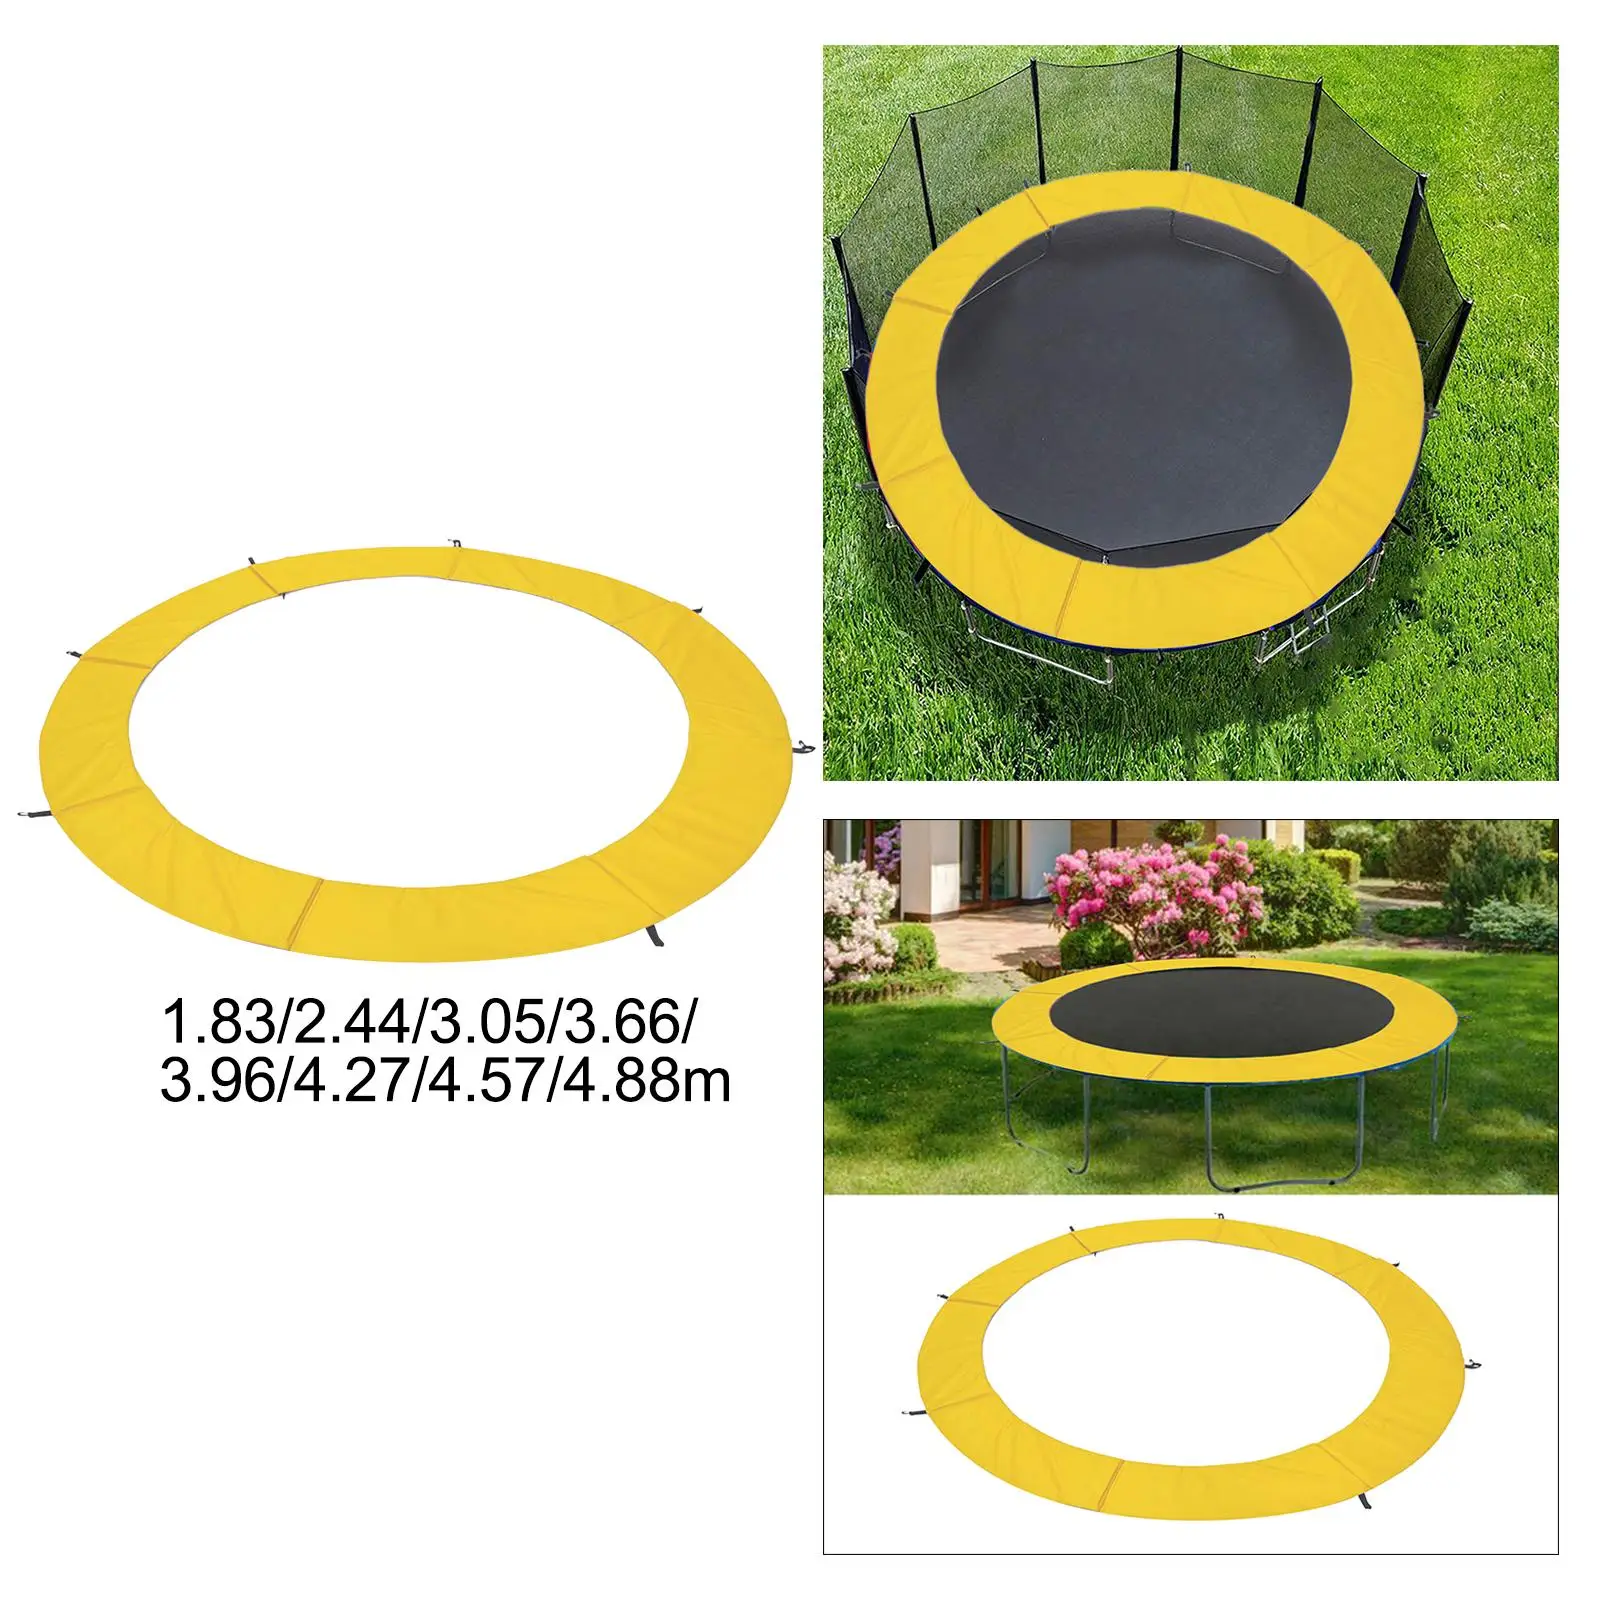 Trampoline Pad Cover Replacement Safety Padding Tear Resistant Waterproof Jumping Bed Cover Surround Guard Easy to Install